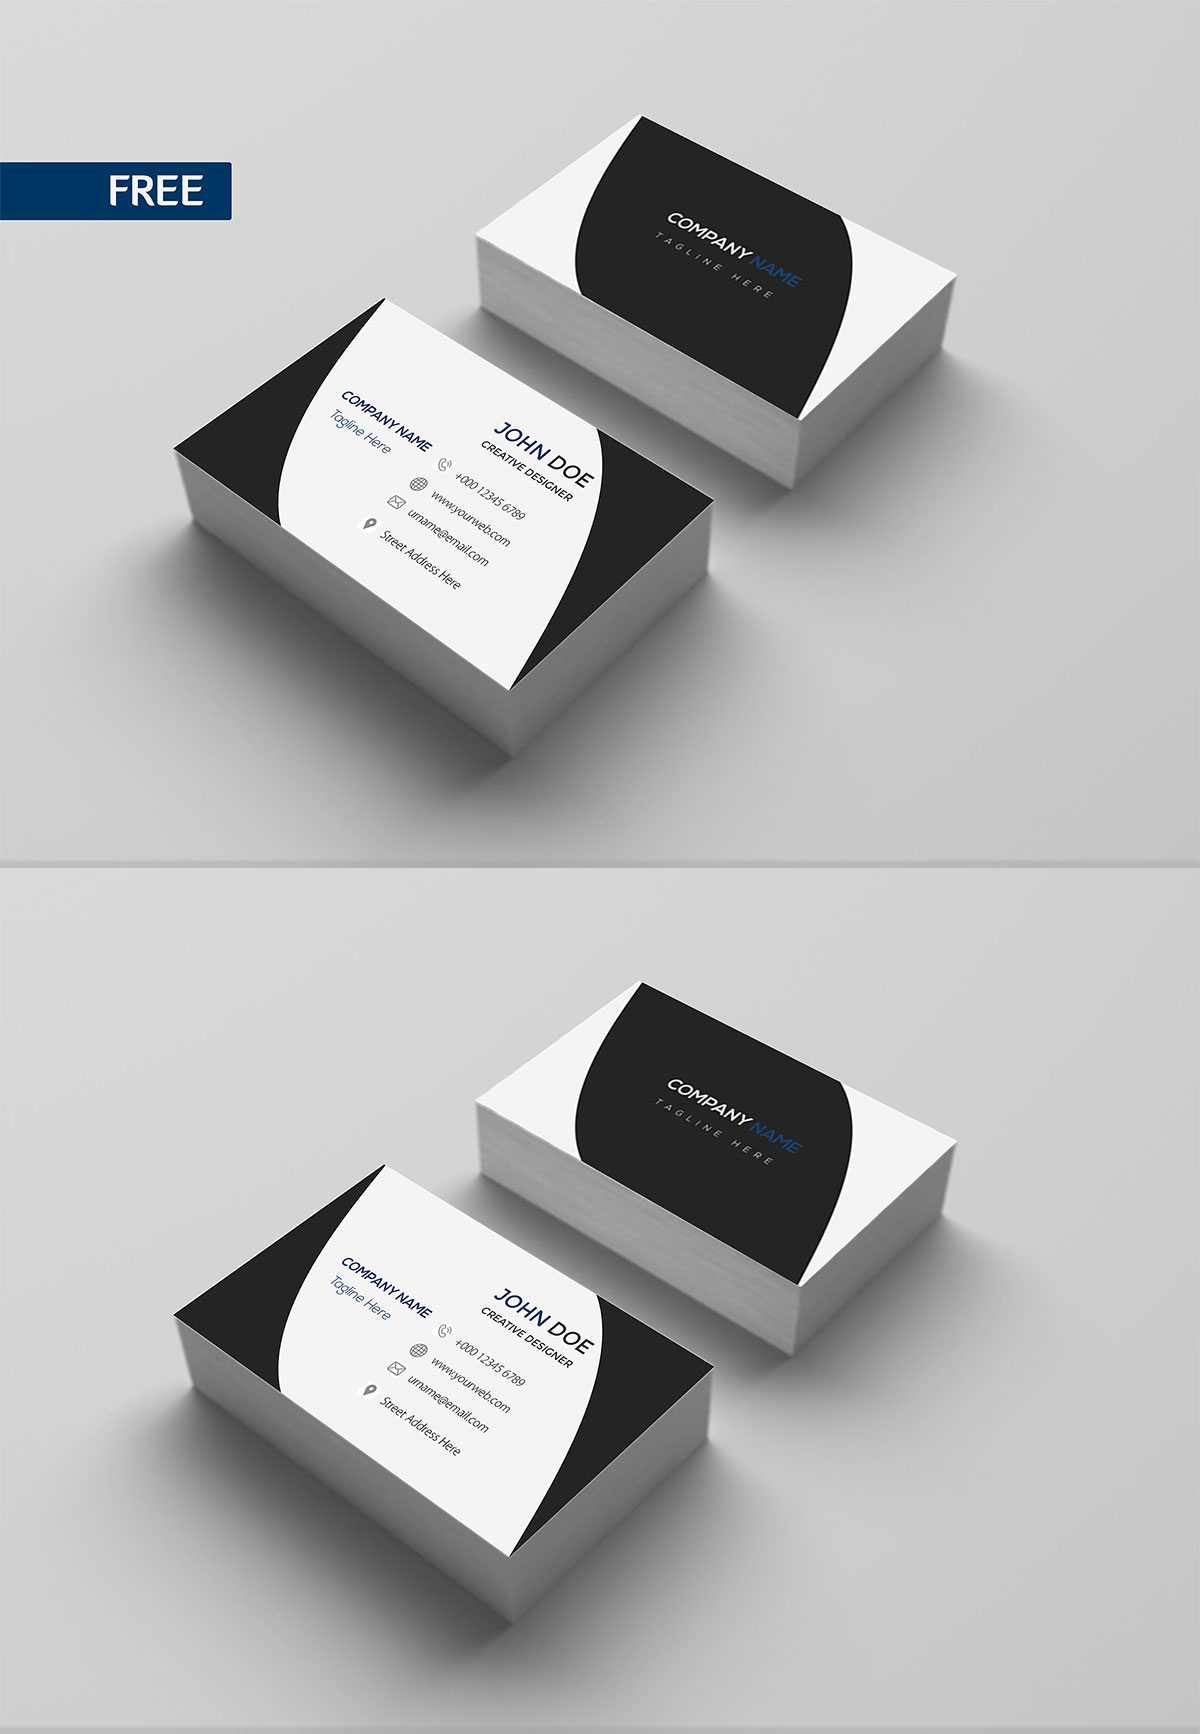 Free Print Design Business Card Template – Creativetacos With Free Templates For Cards Print